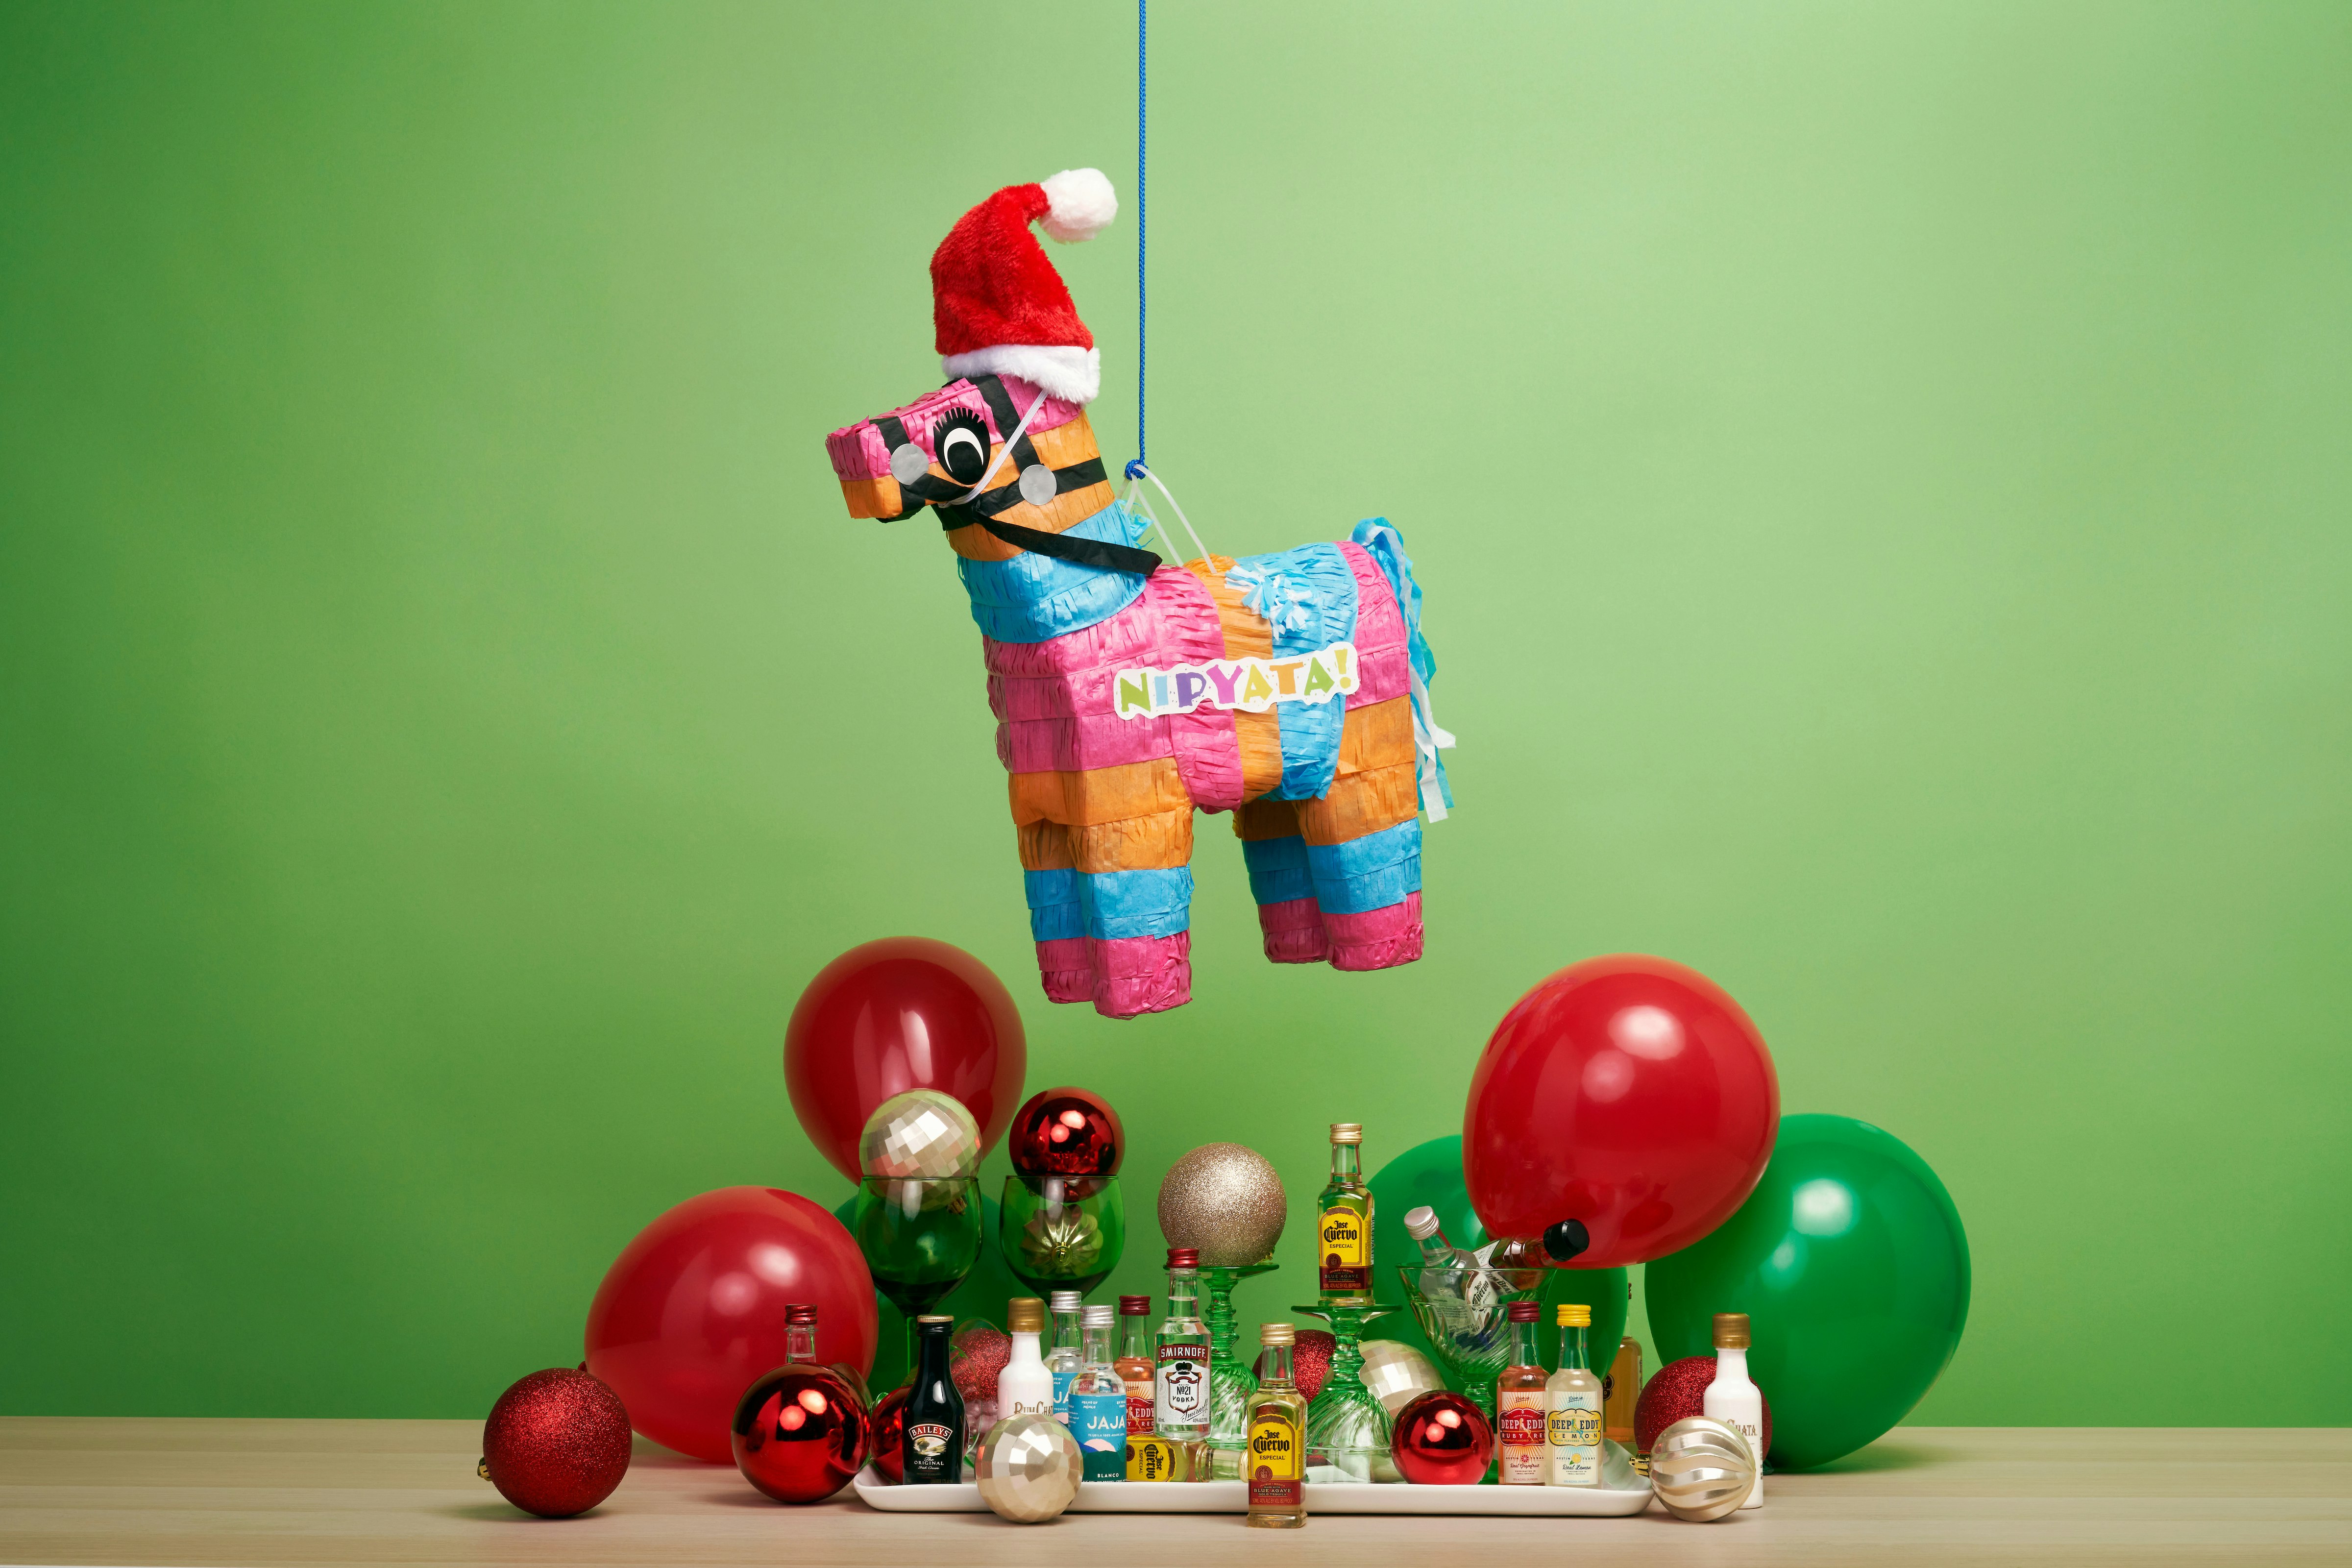 "The most entertaining gift I've ever received." Send a boozy lover a booze-filled piñata today. The ultimate Christmas Gift for grown ups who refuse to grow up.